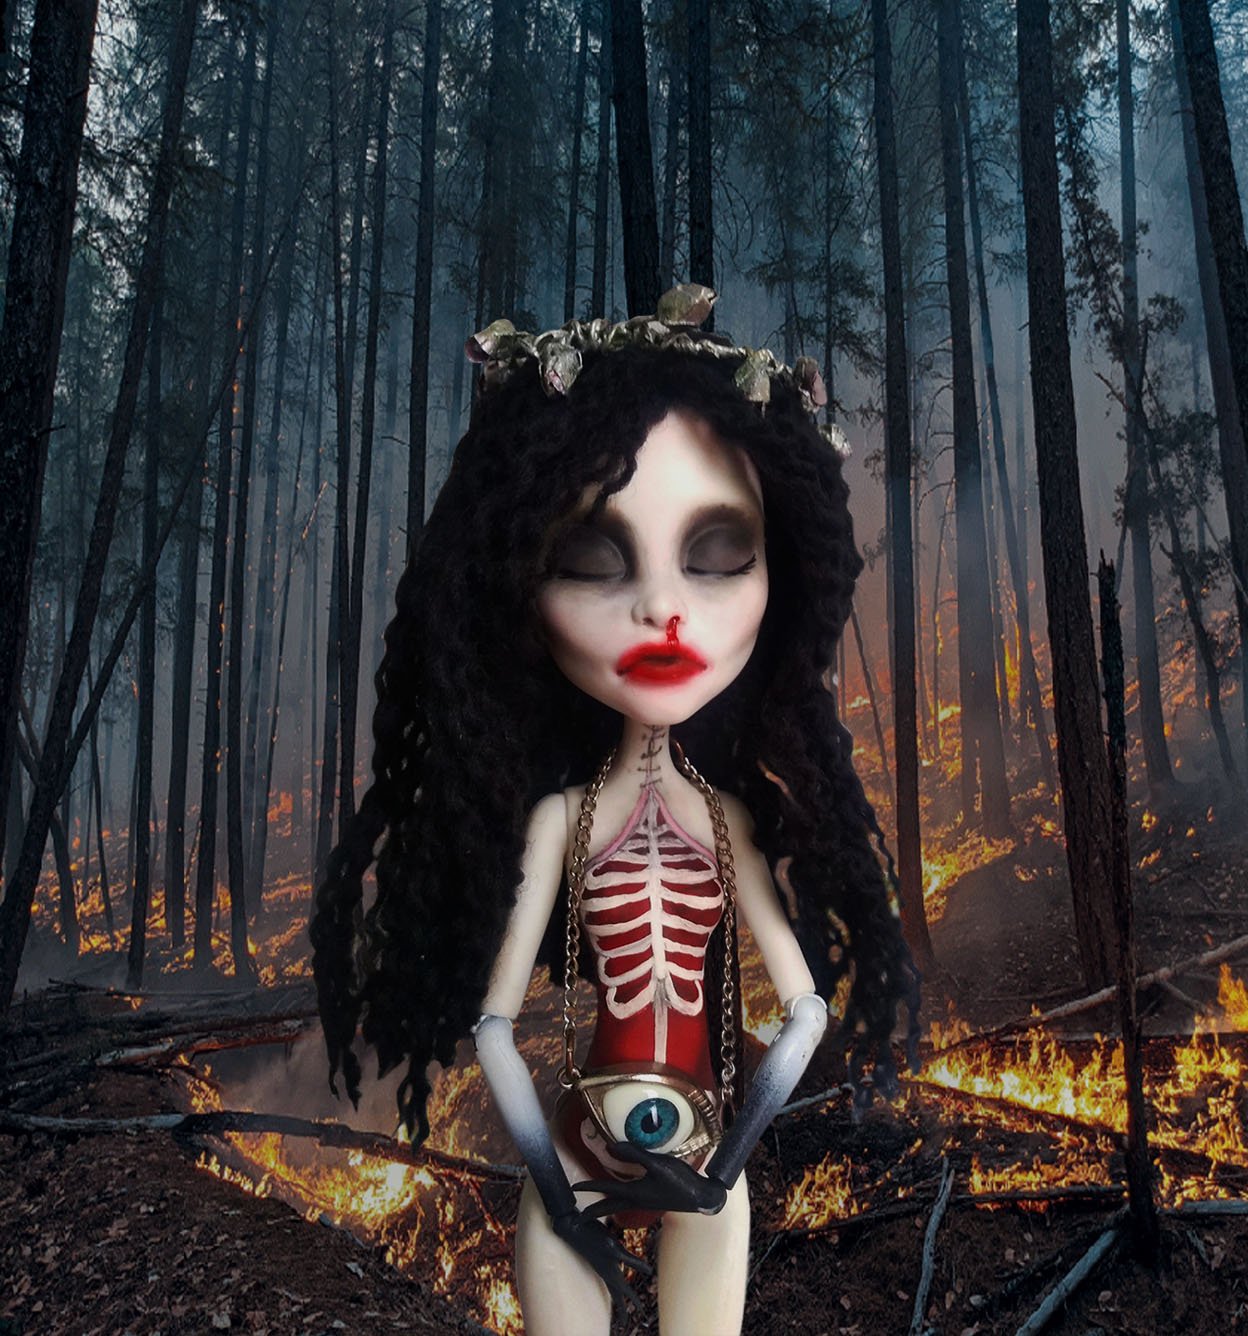 Death | gothic art doll inspired by mental health and loss - OOAK